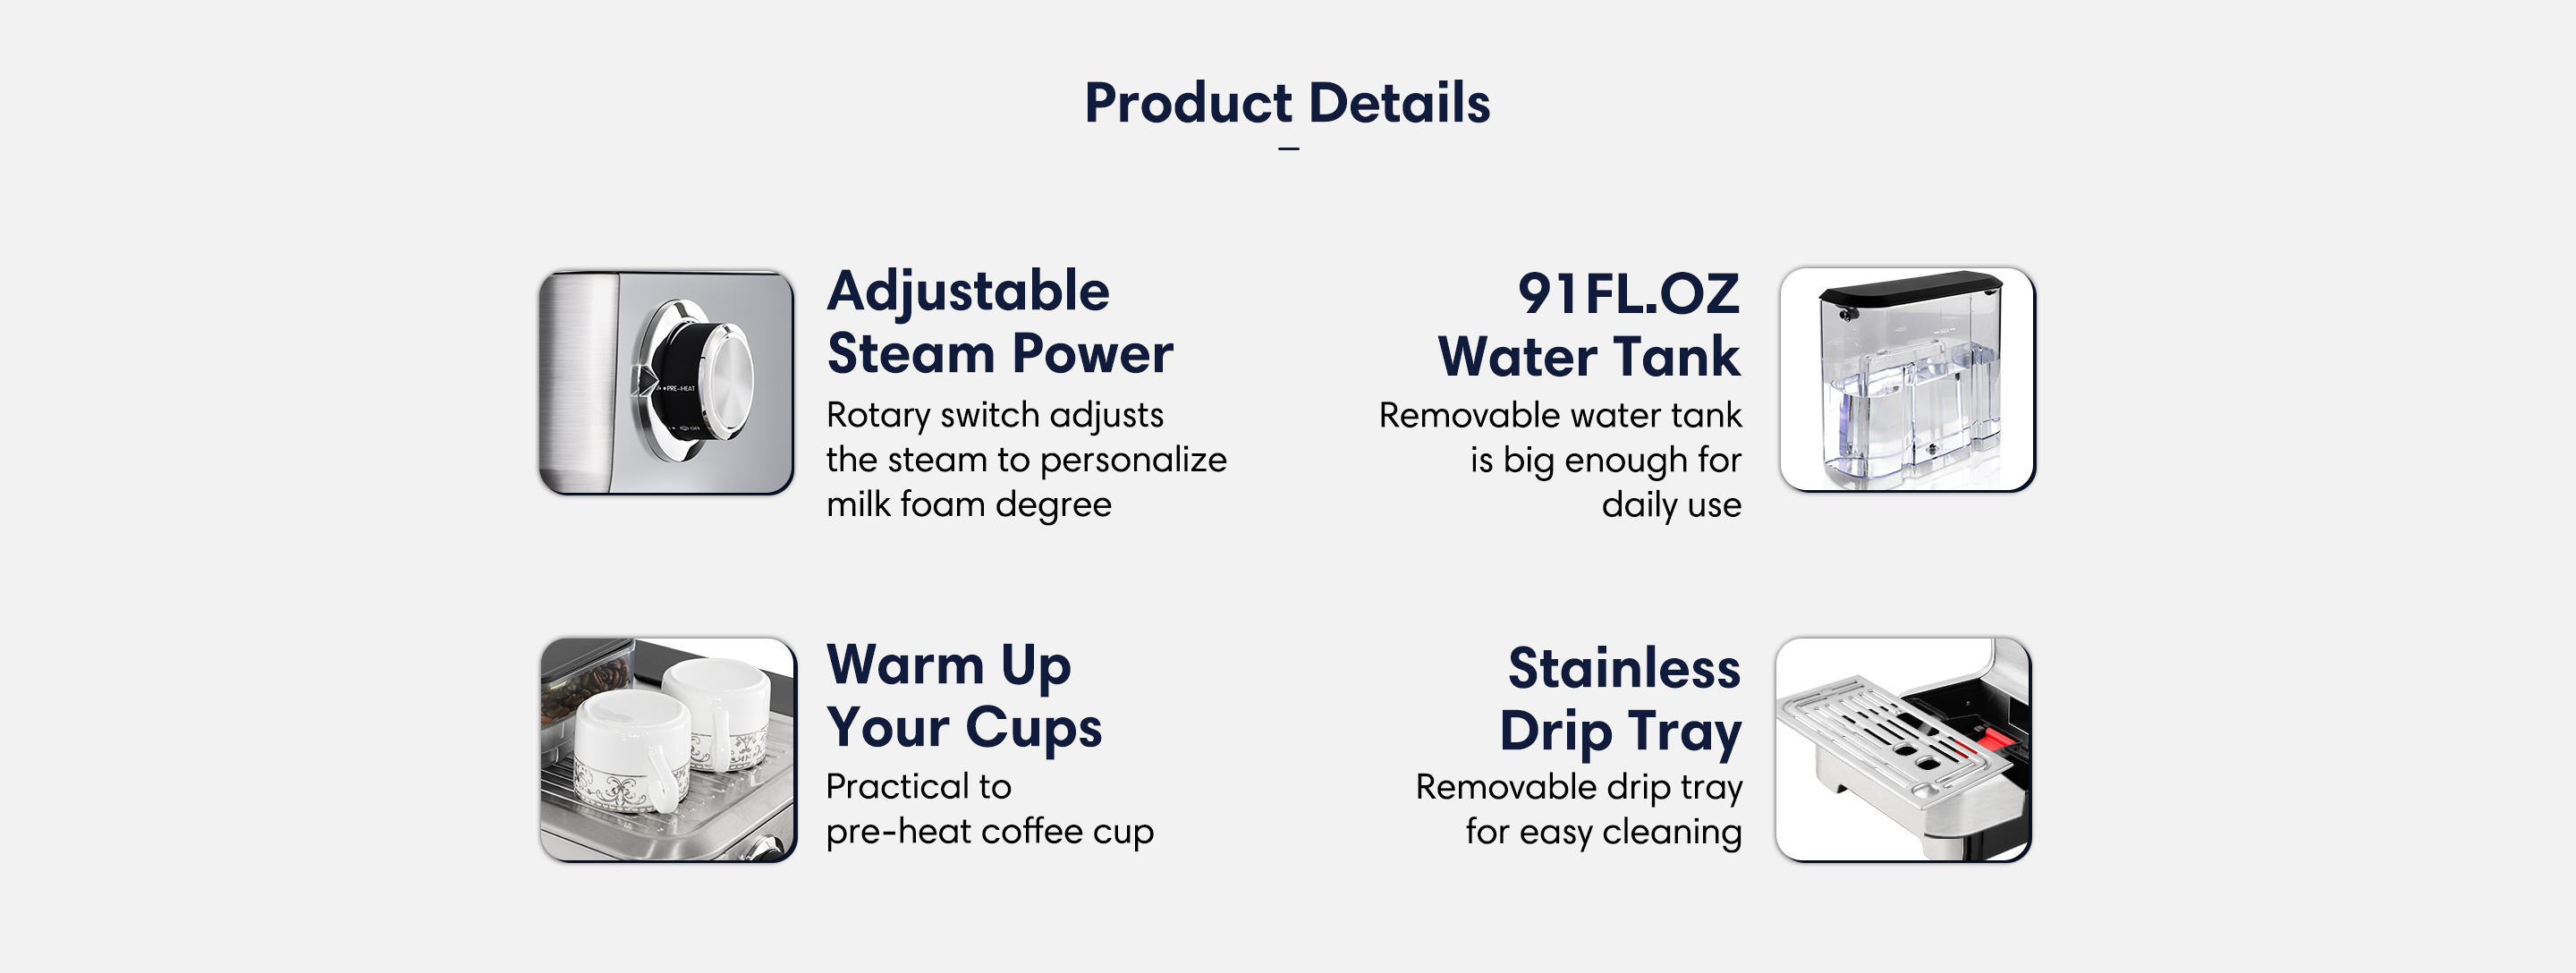 adjustable steam power 91oz water tank warm up your cups stainless drip tray